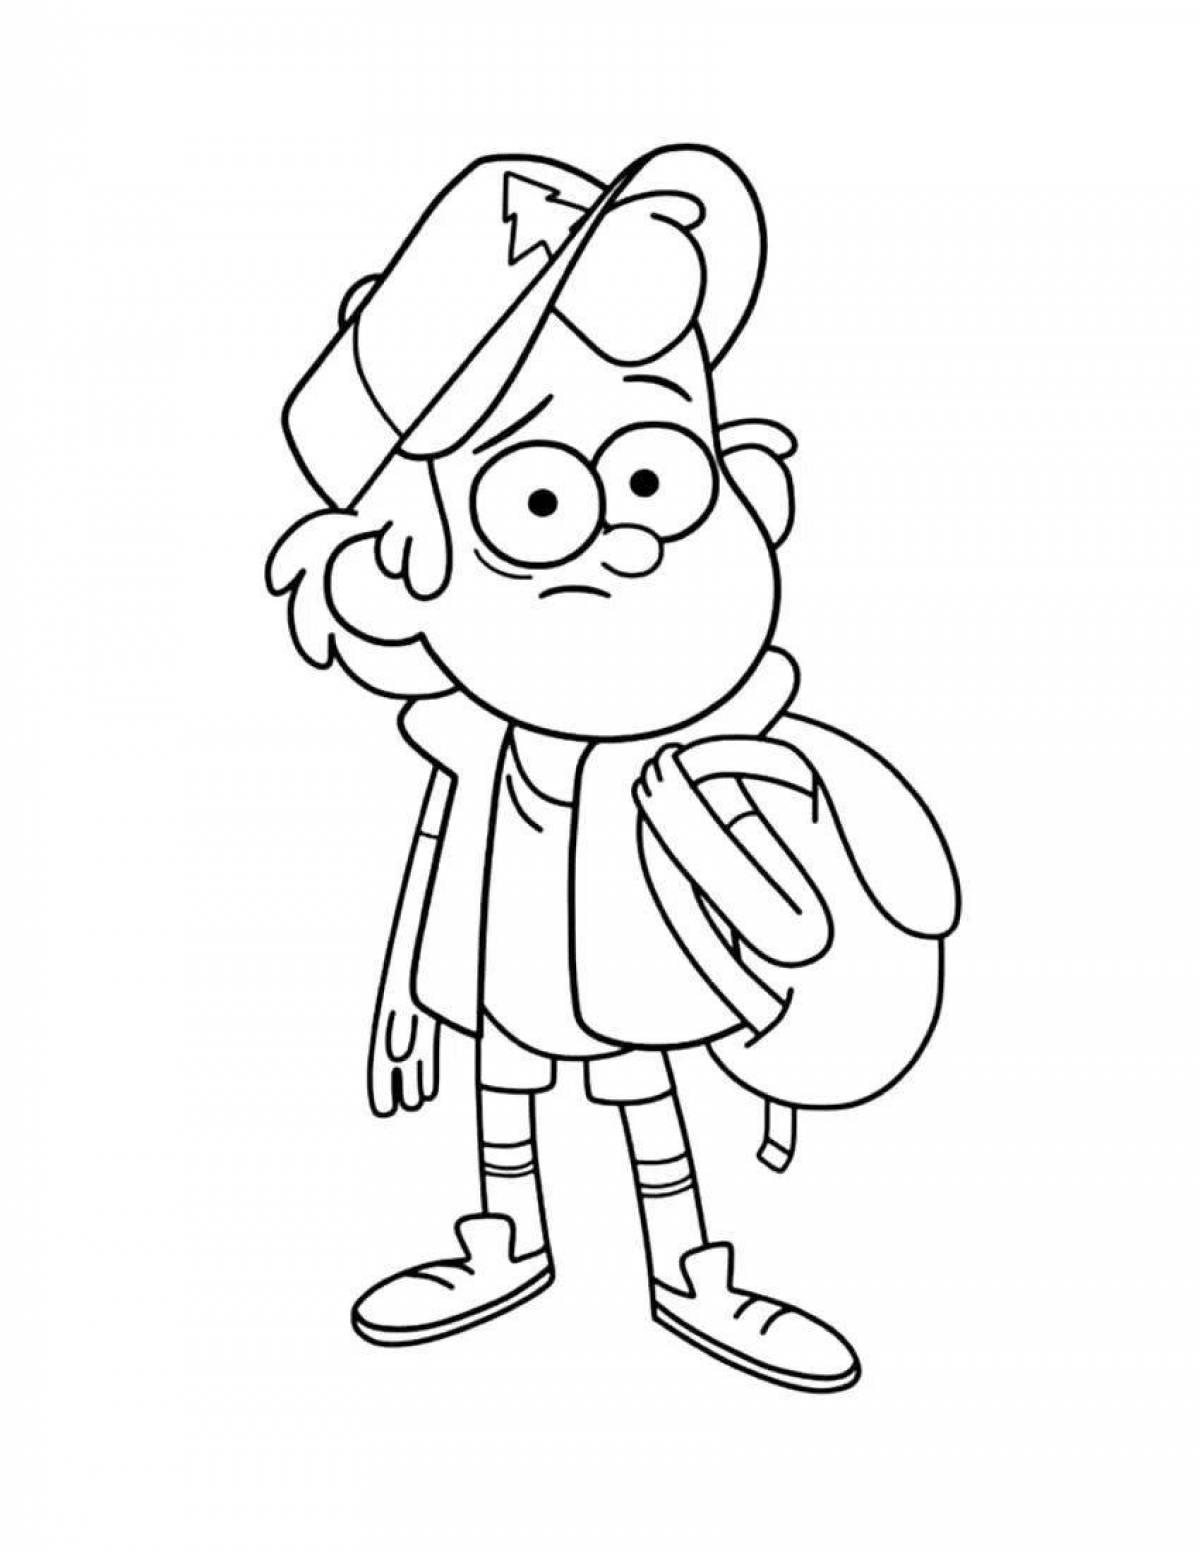 Gravity falls animated coloring book for girls